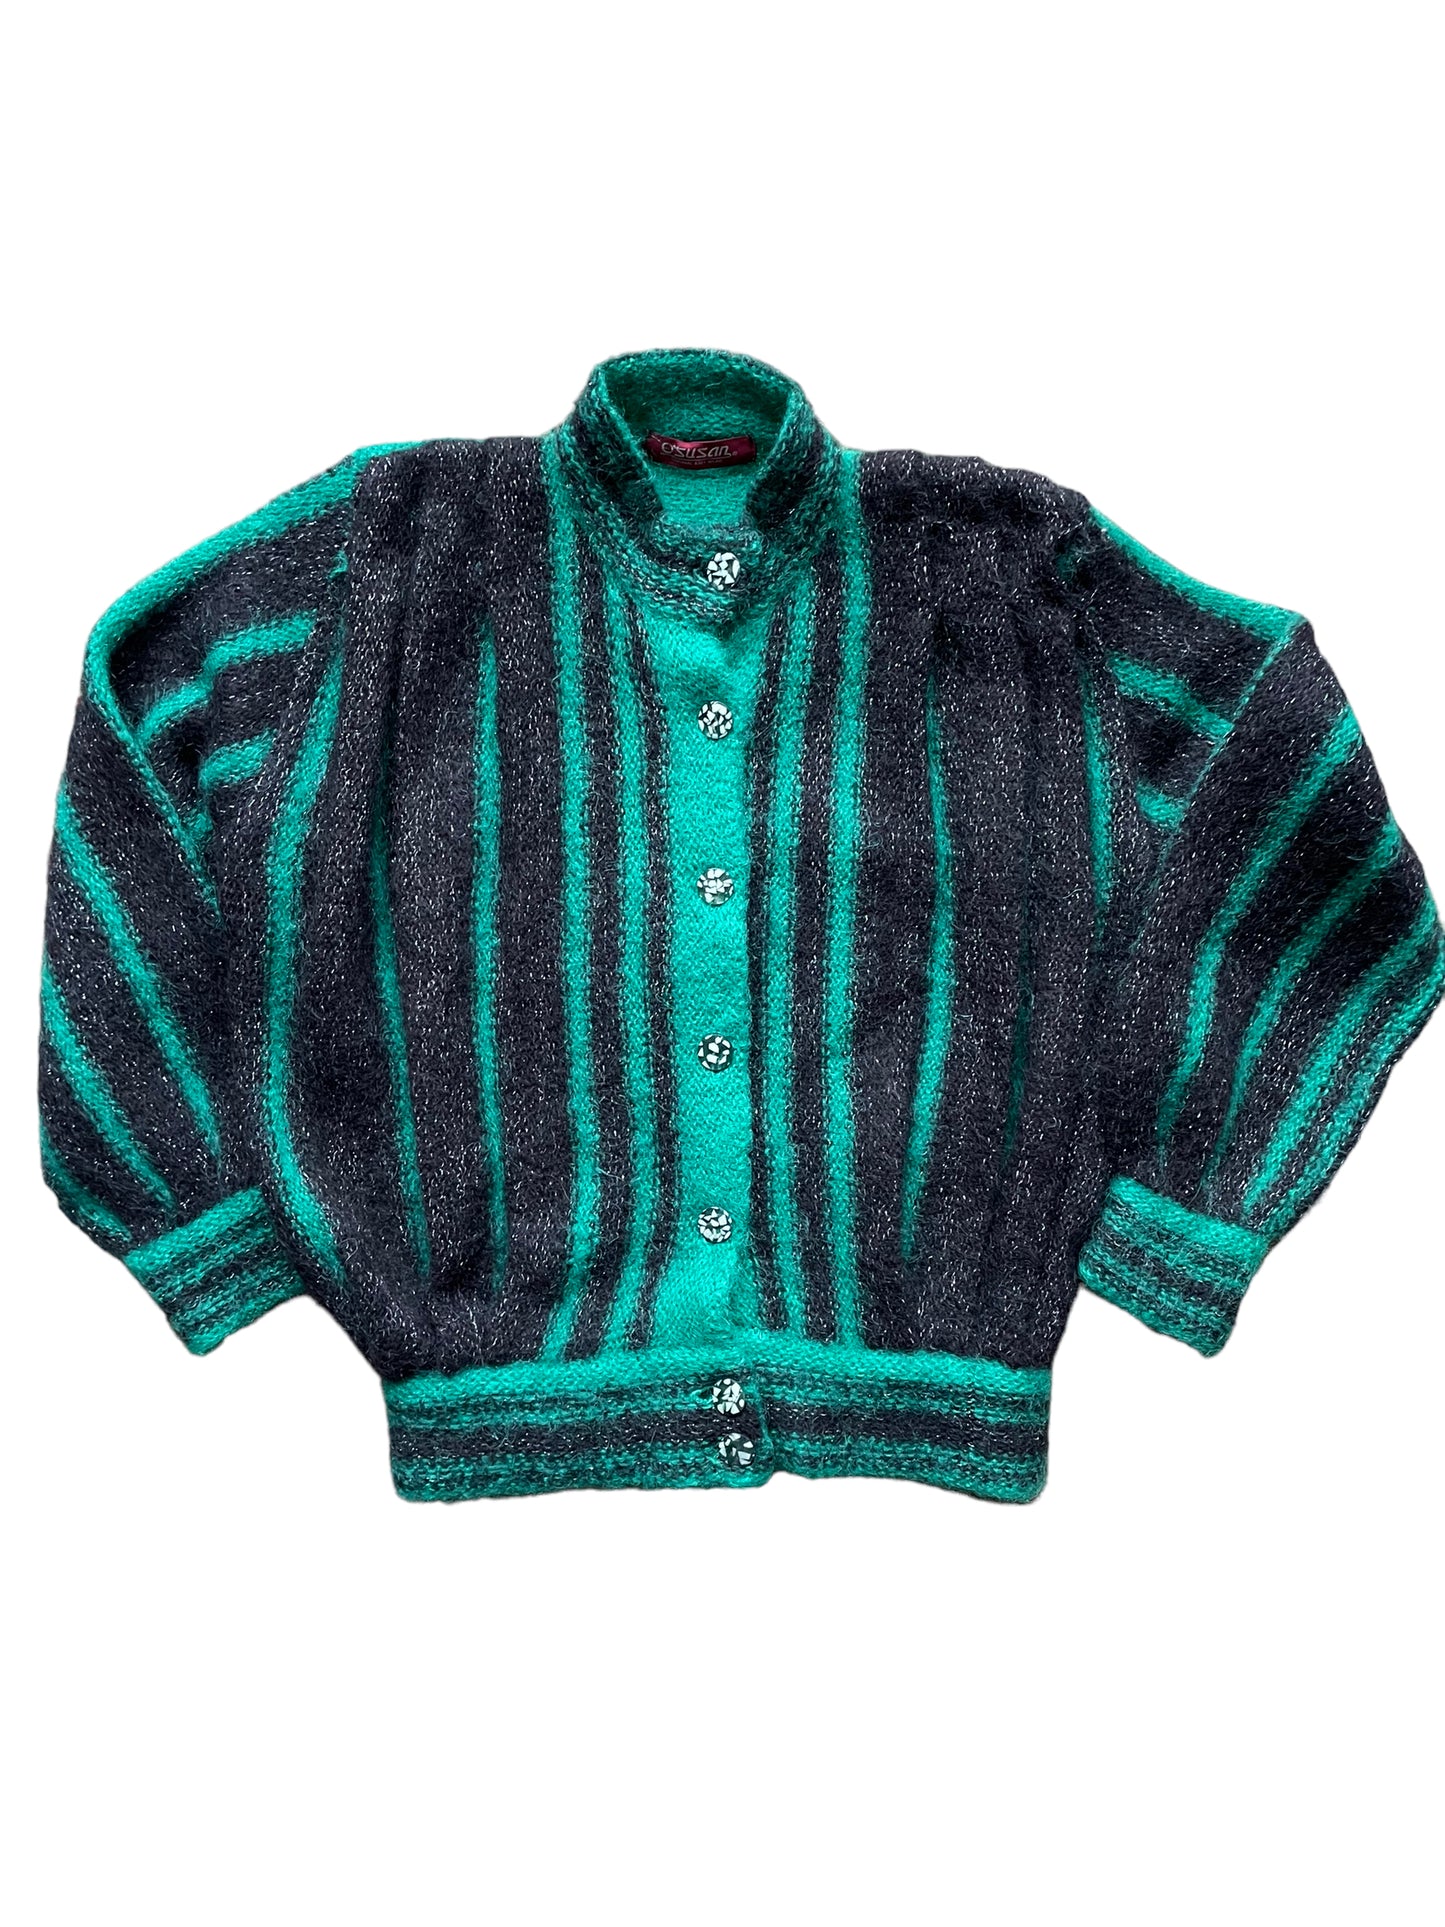 Full front view of Vintage 80s Green and Black Sparkly Cardigan SZ L | Seattle True Vintage | Barn Owl Vintage Womens Clothing